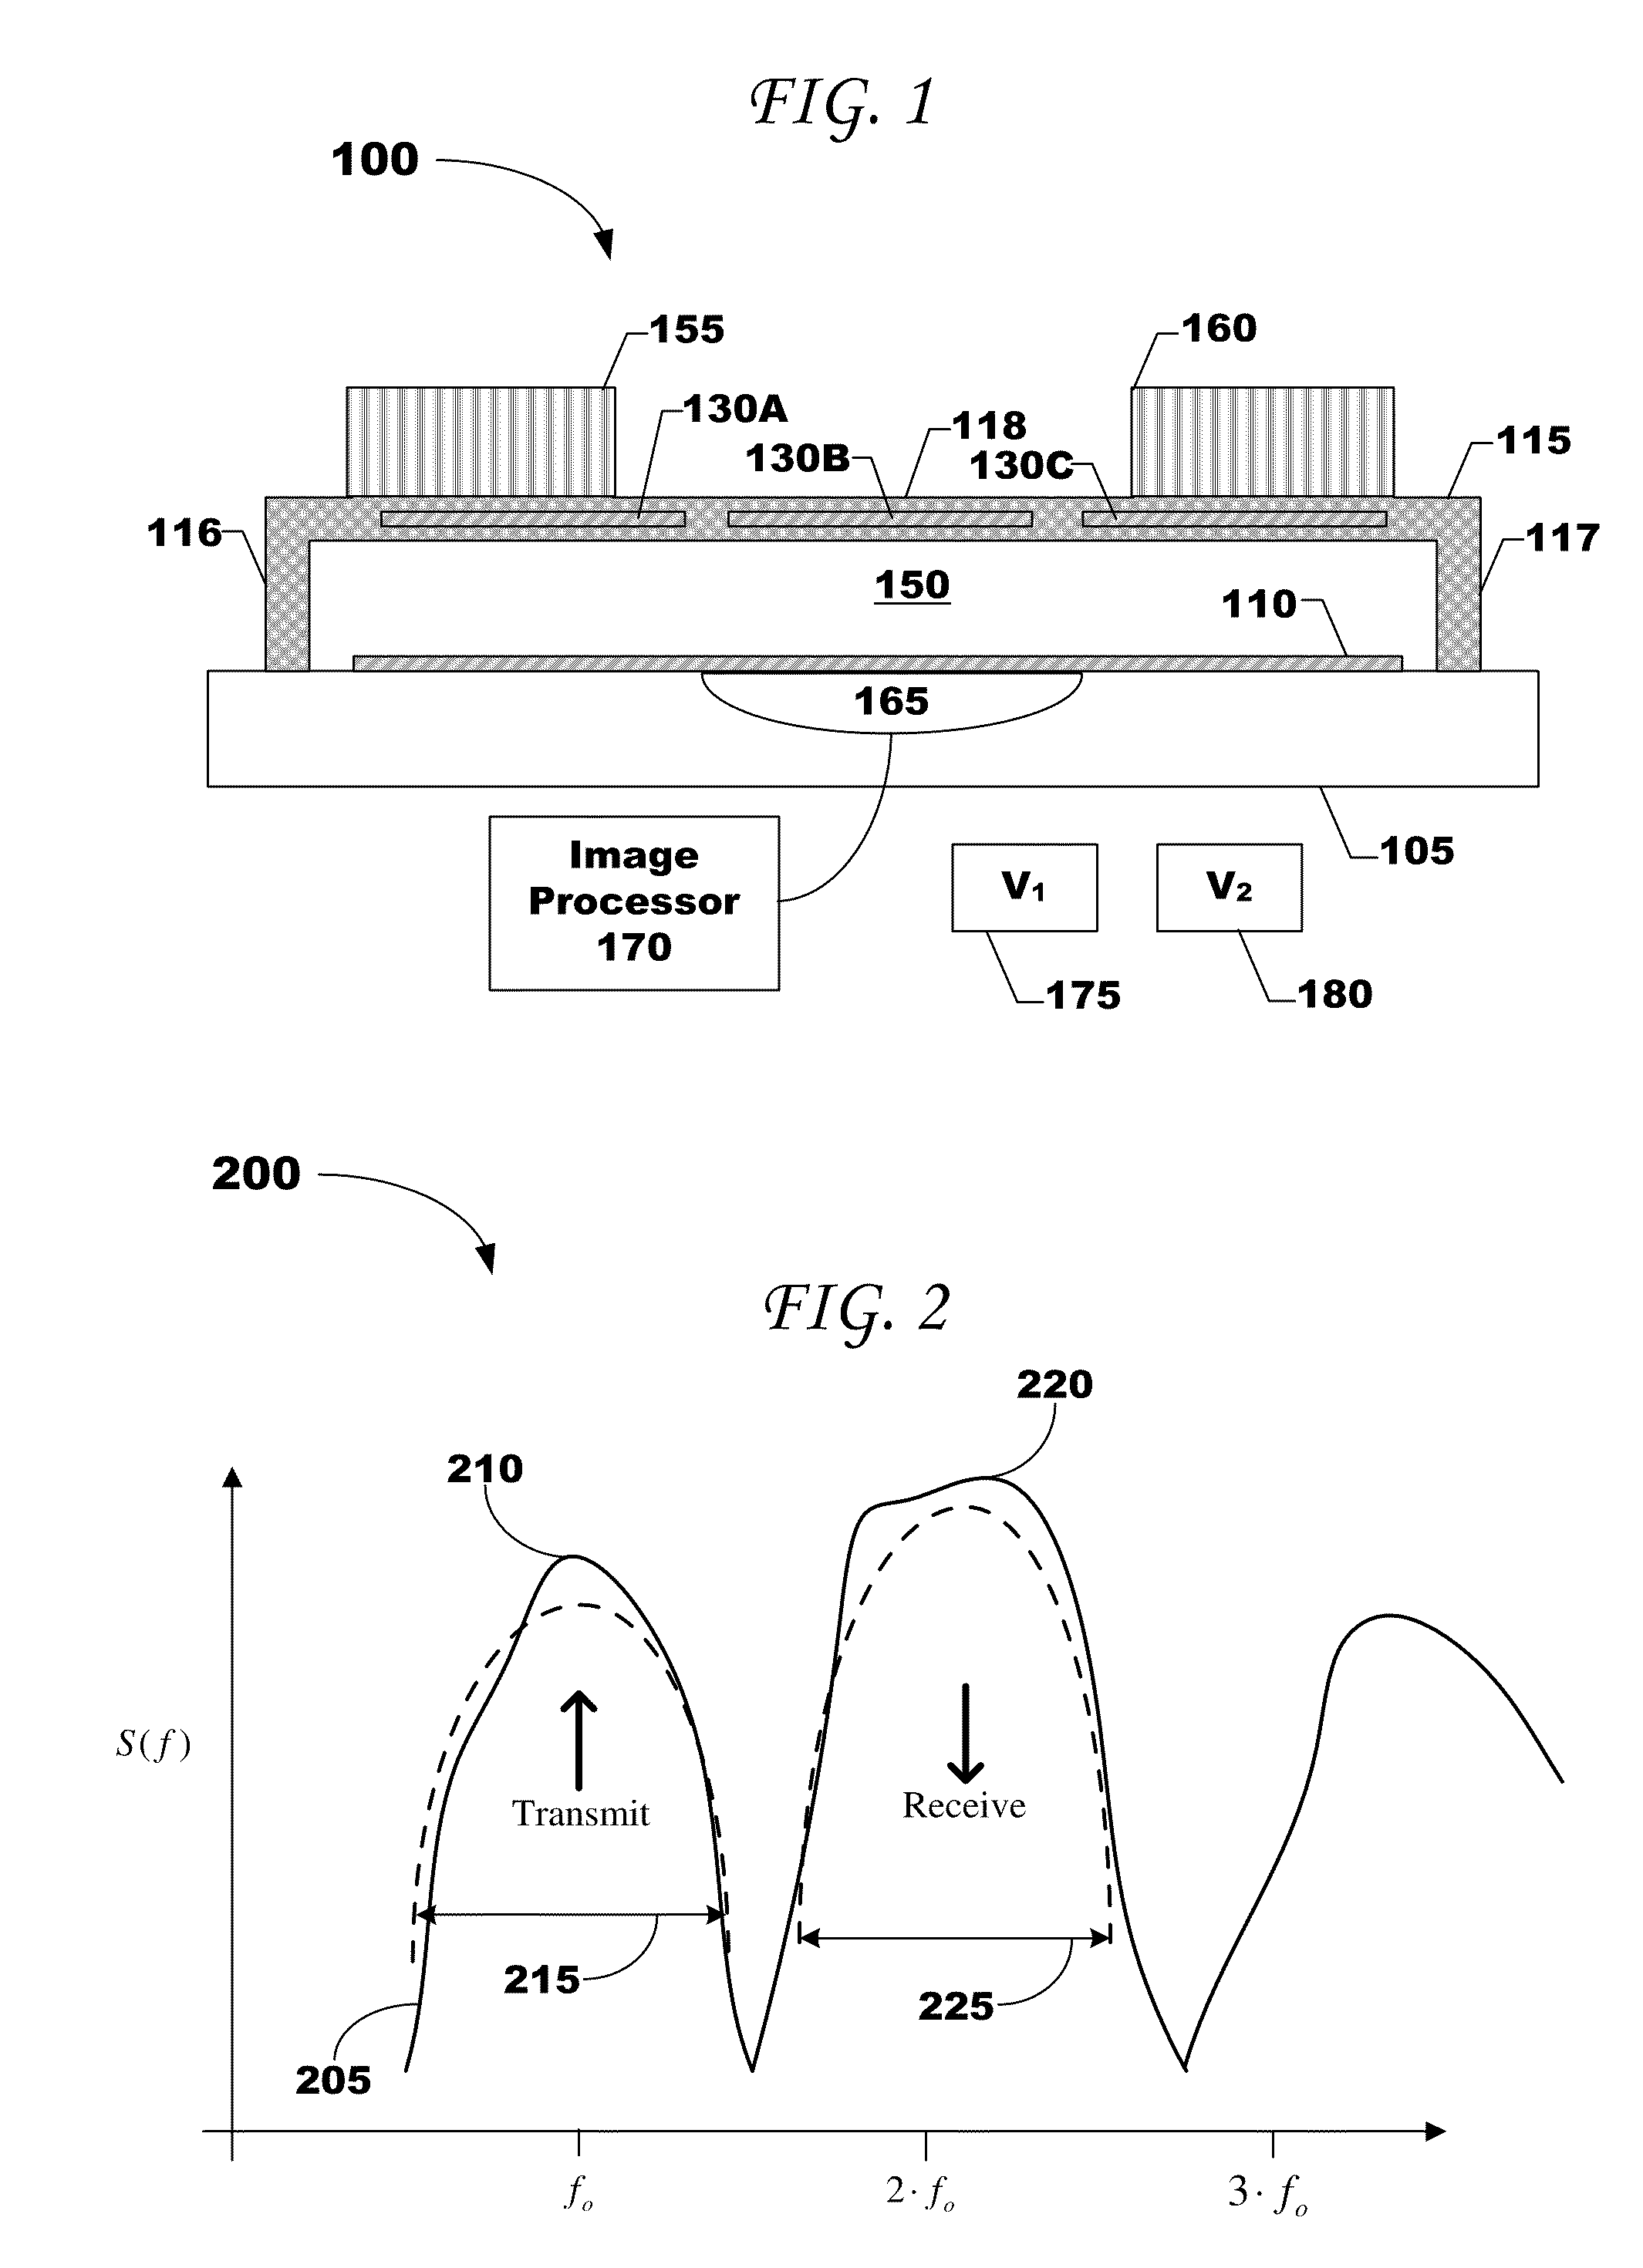 Asymmetric membrane cmut devices and fabrication methods